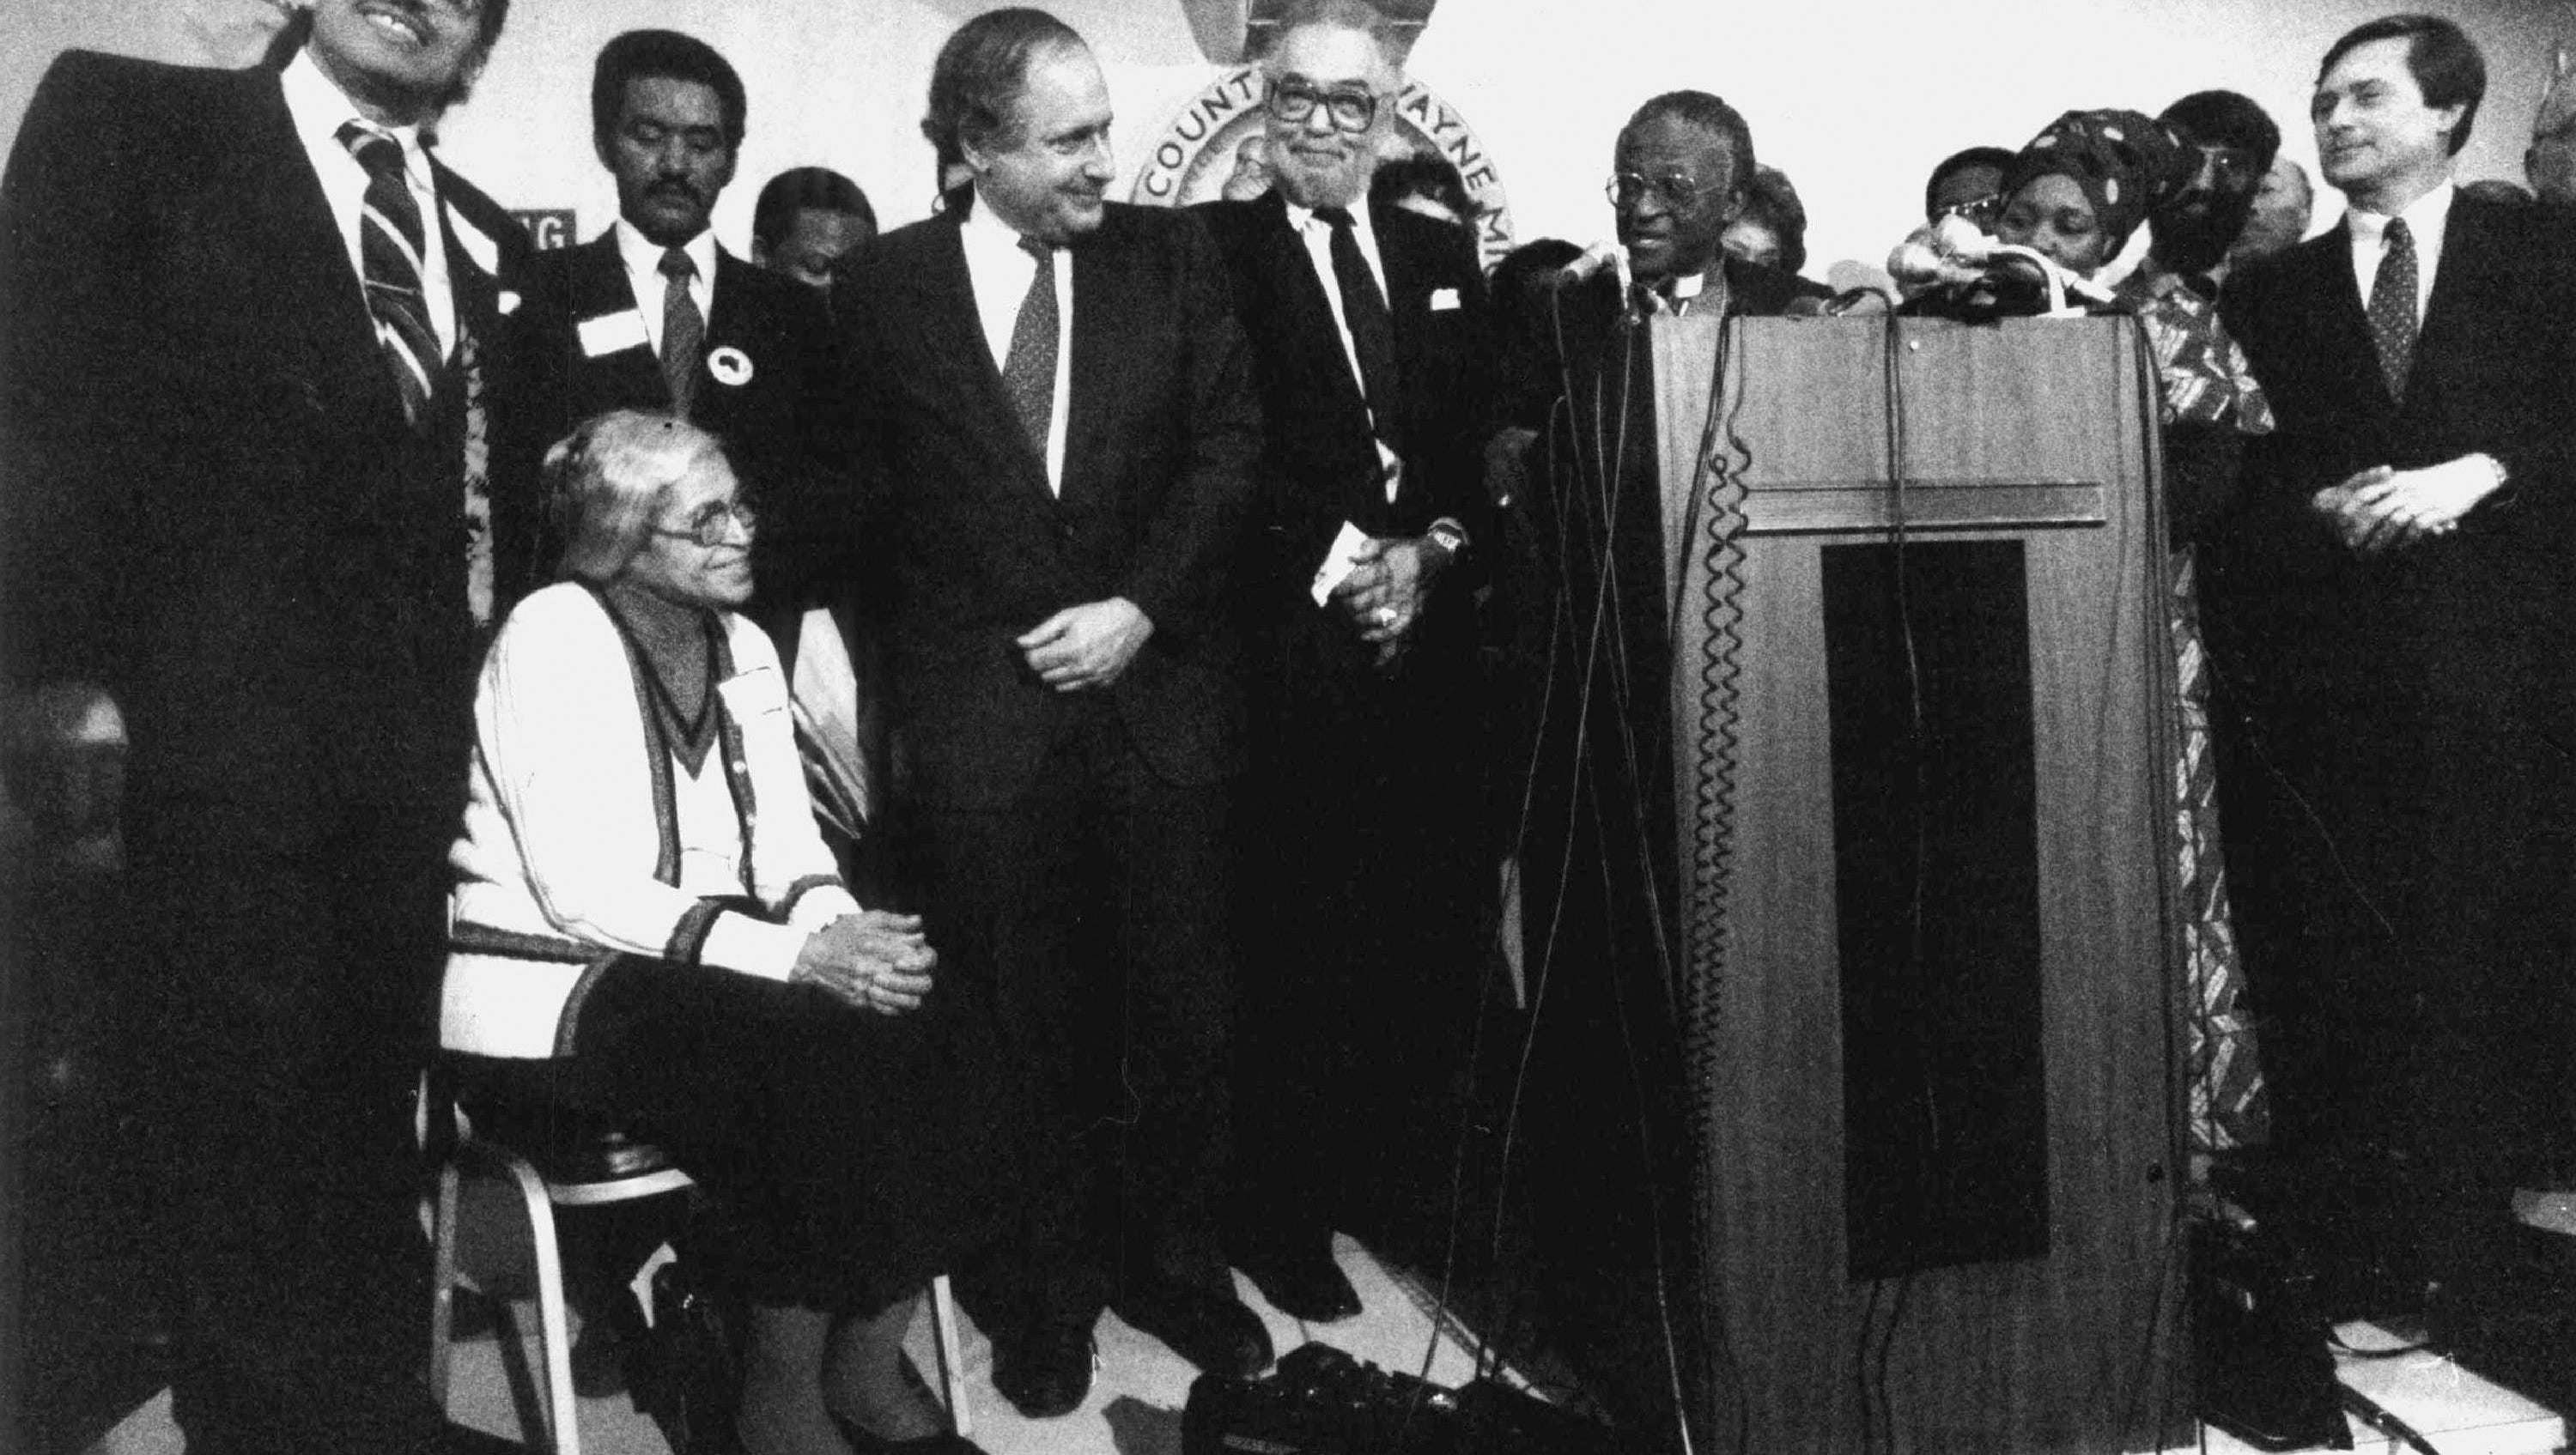 Sen. Cart Levin, center left, is among the dignitaries,  including Detroit Mayor Coleman Young, Bishop Desmond Tutu of South Africa and  Gov. James Blanchard  at an event honoring  civil rights pioneer Rosa Parks, seated,  in Detroit in January 1986.